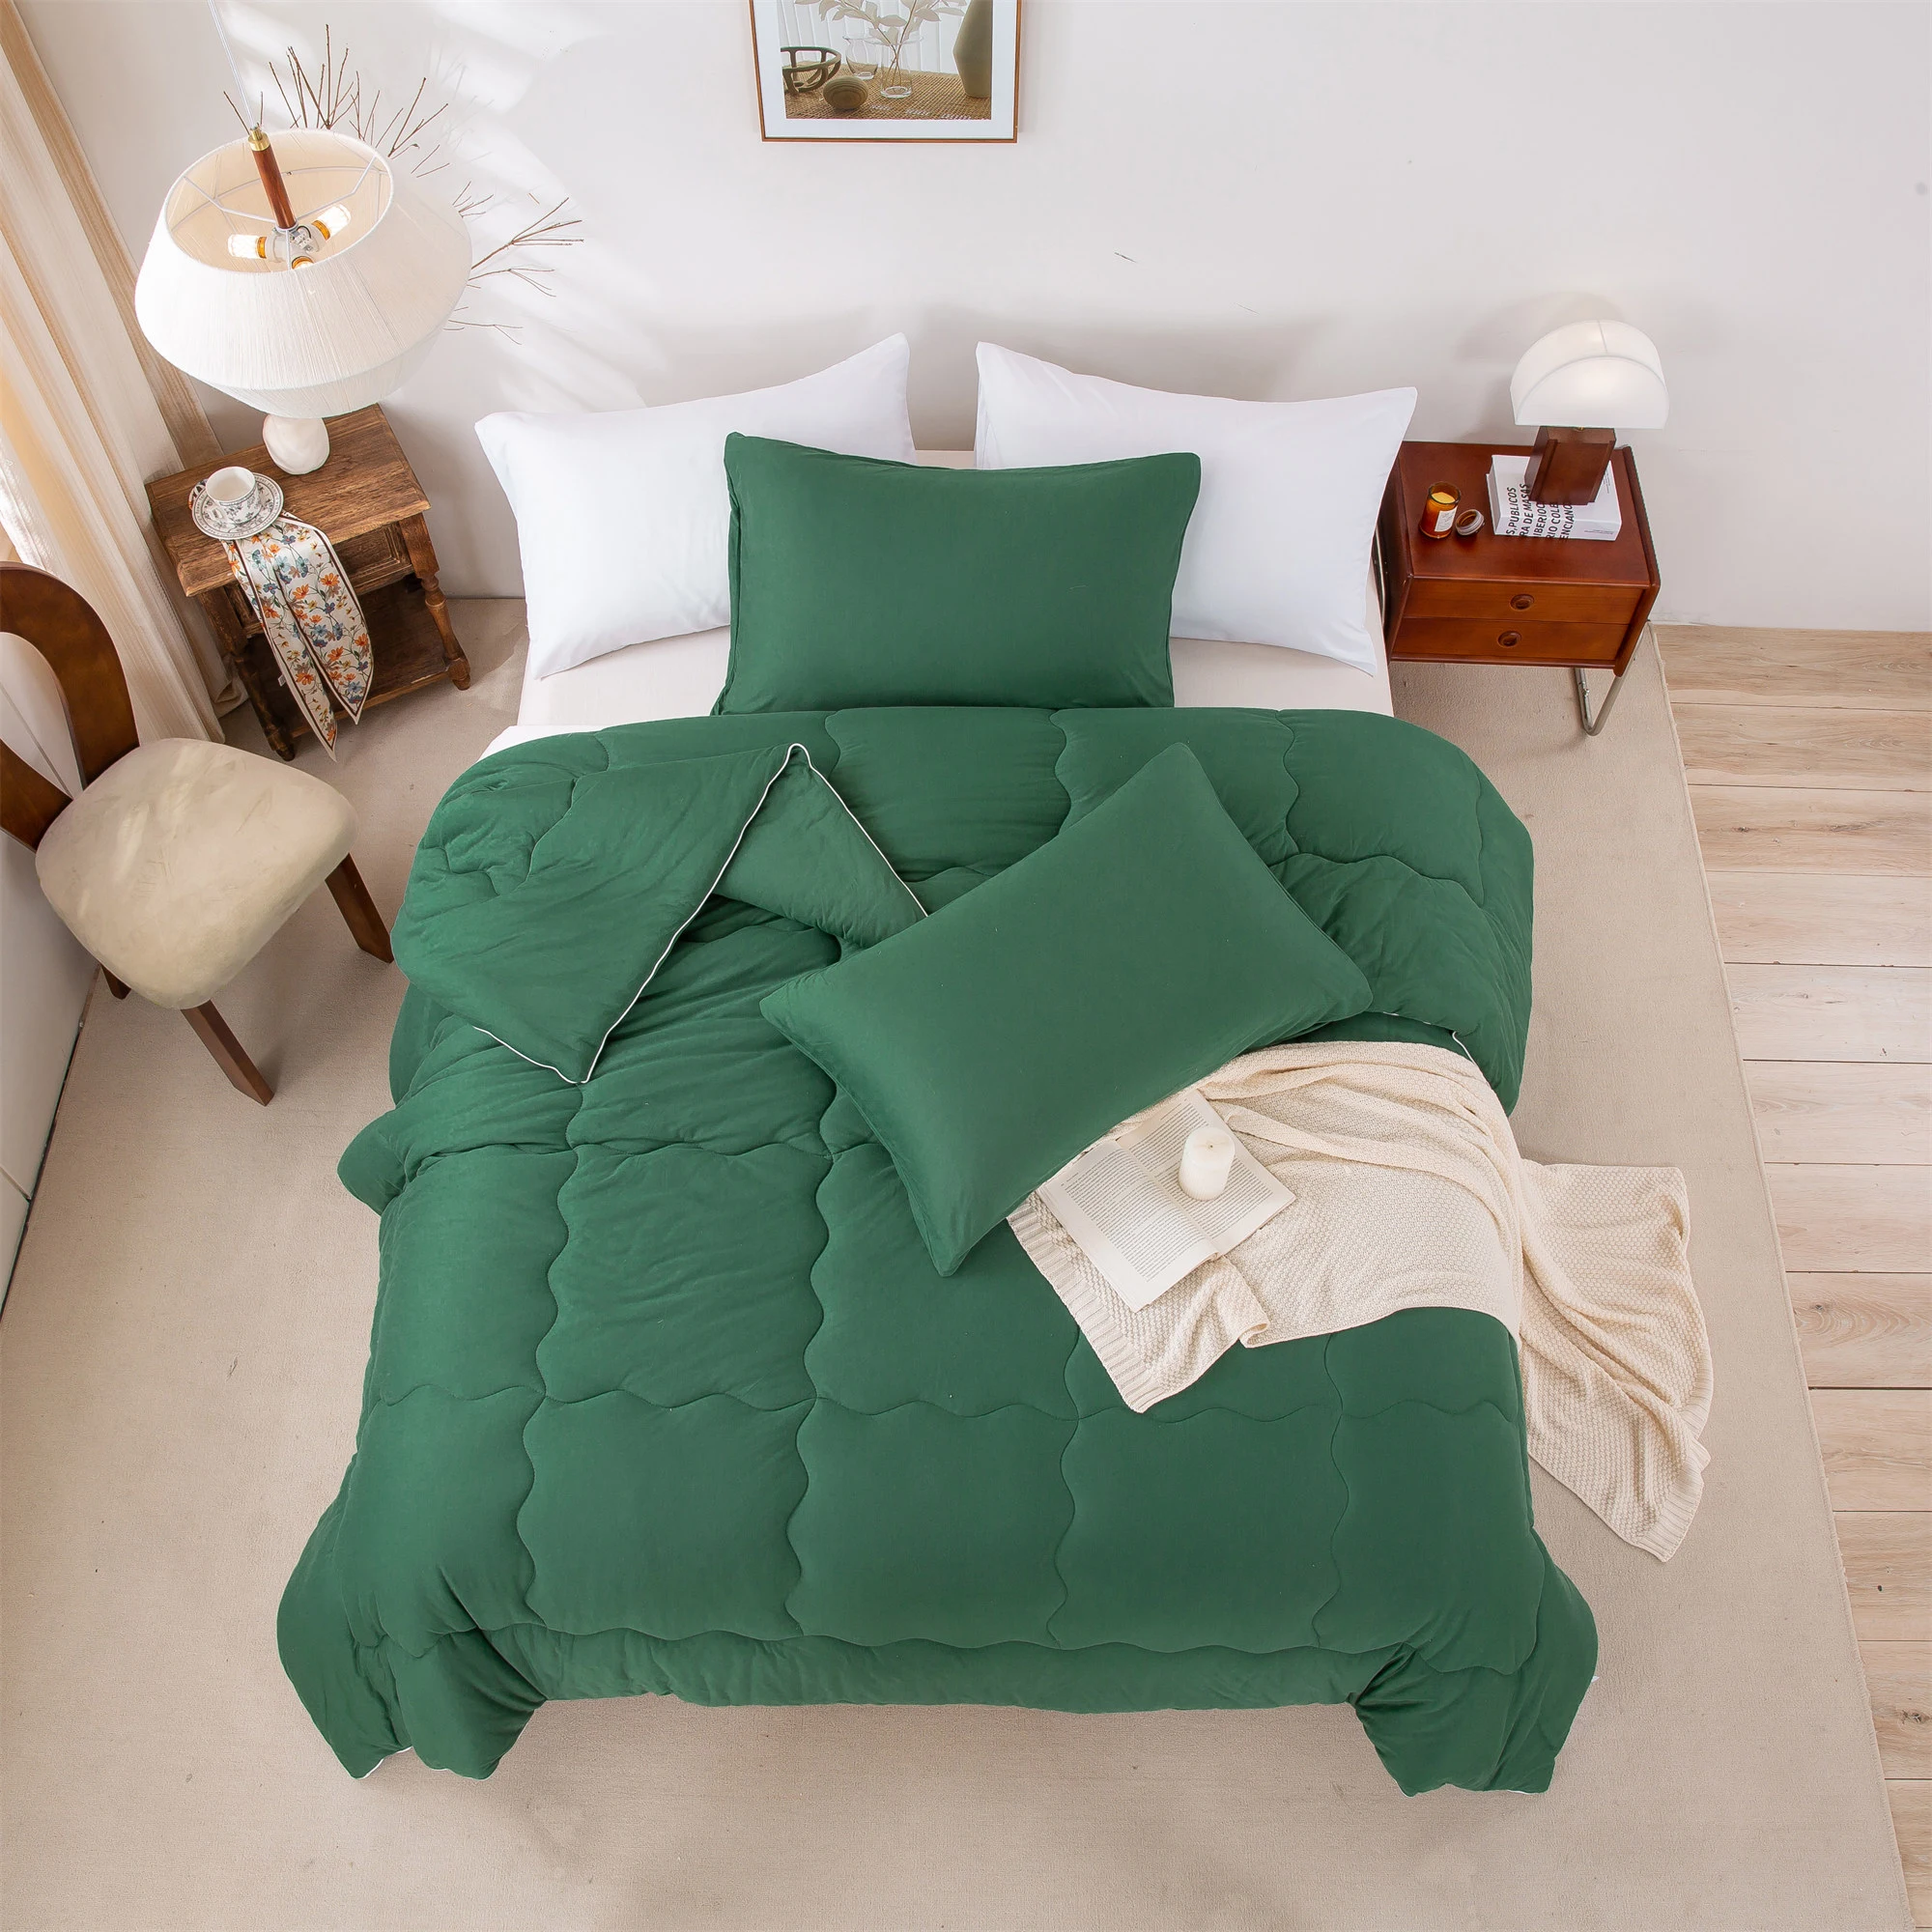 

Available in all seasons ReversibleUltraSoft Comforter Set Jersey Knit Cotton Cozy Breathable Bedding Emerald Green Queen Size